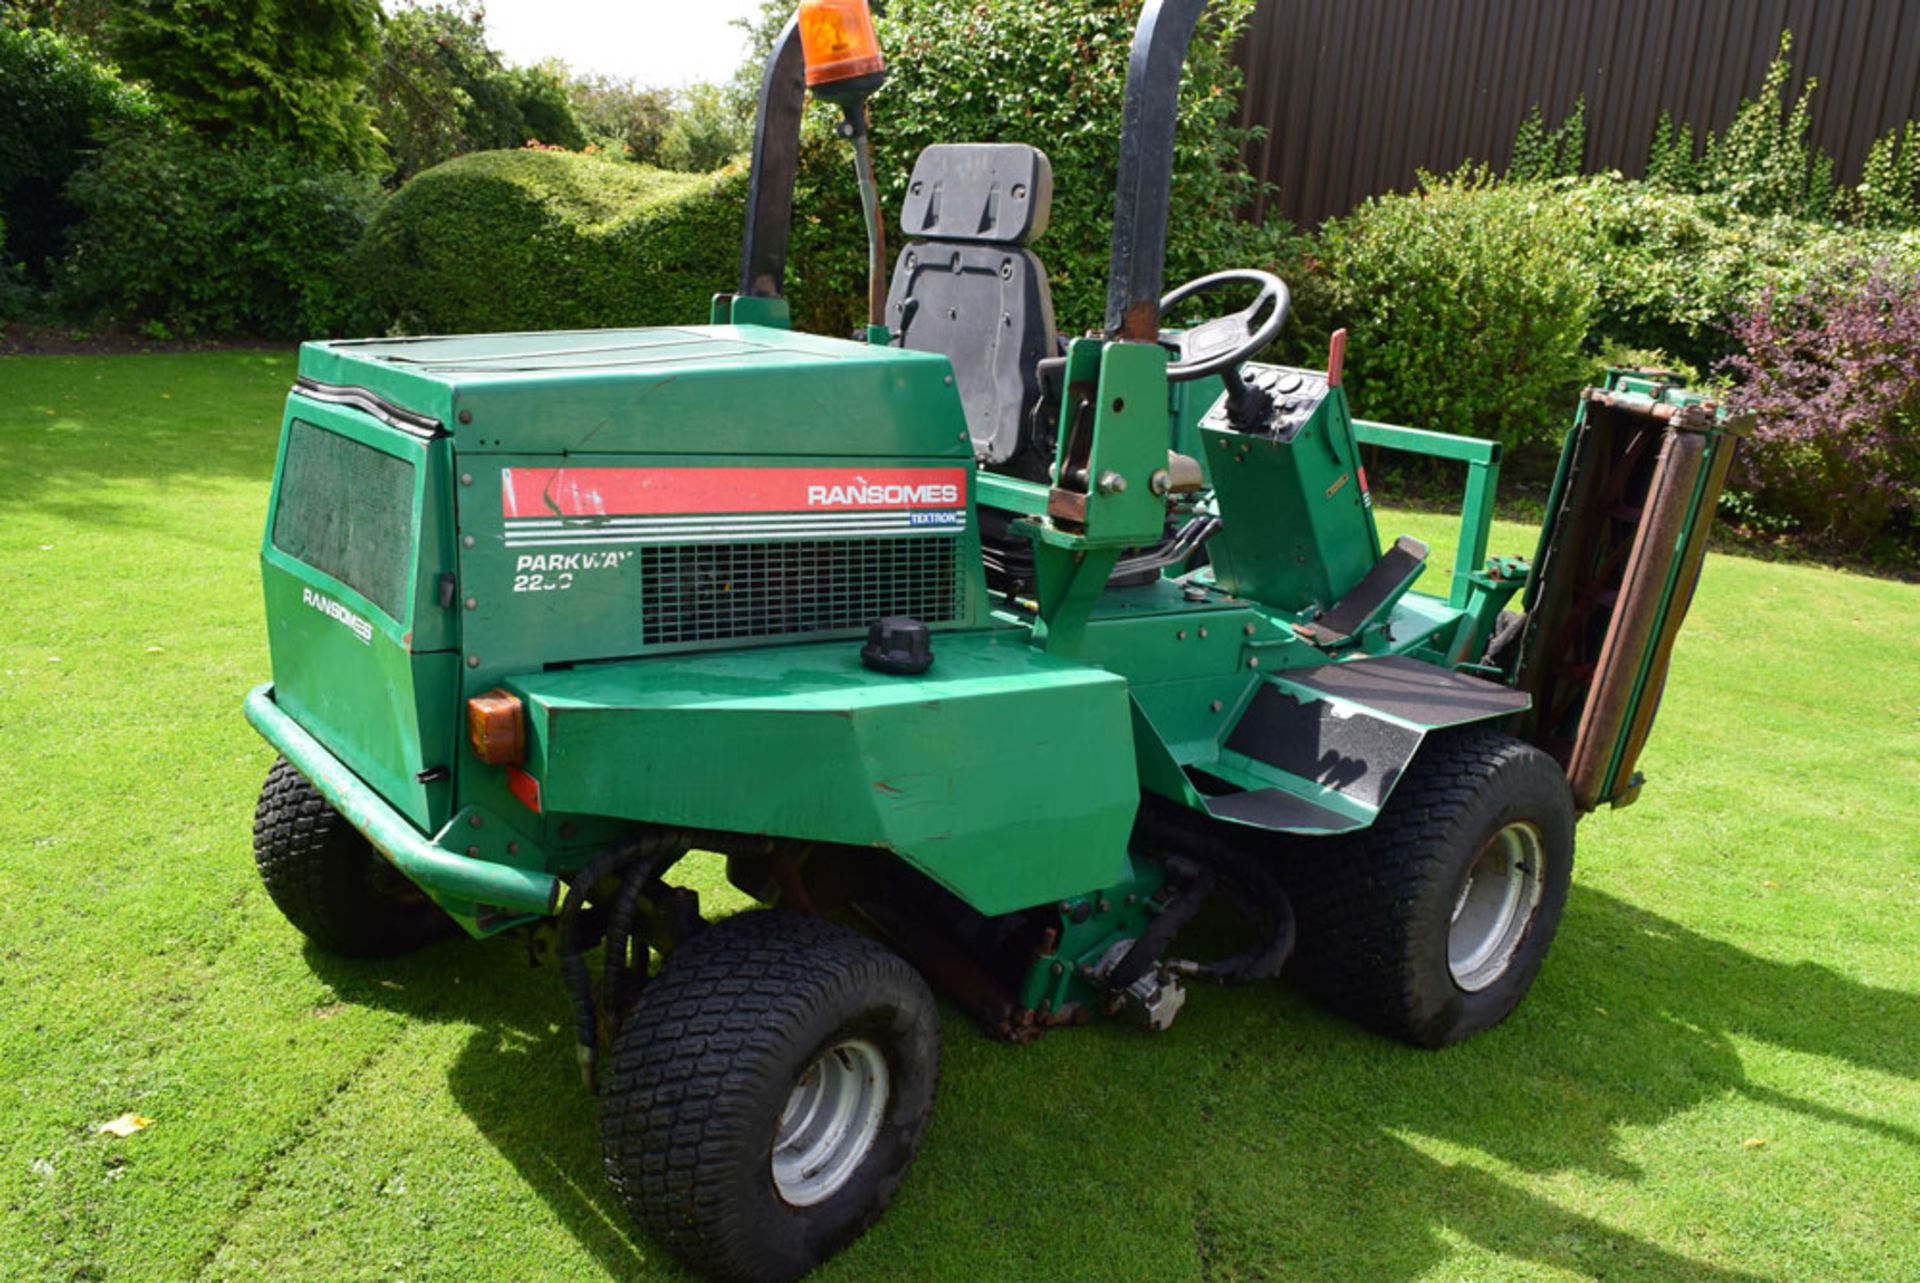 2003 Ransomes Parkway 2250 Plus Ride On Cylinder Mower - Image 6 of 8